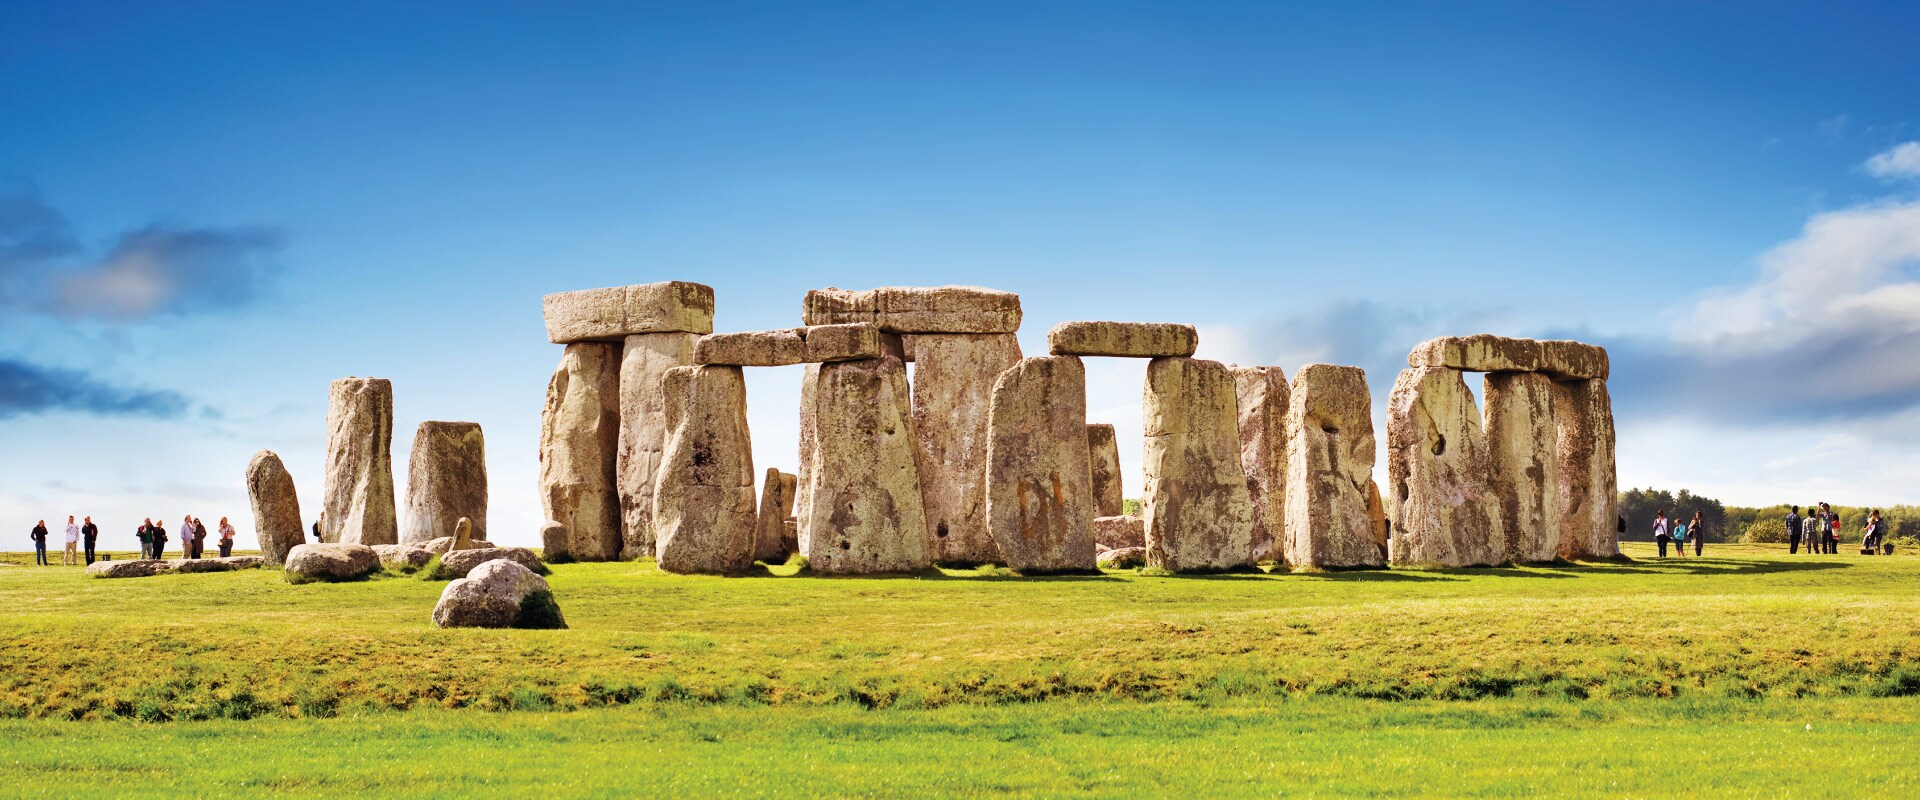 Discover the Stonehenge, one of the most famous prehistoric sites in the world with APT.